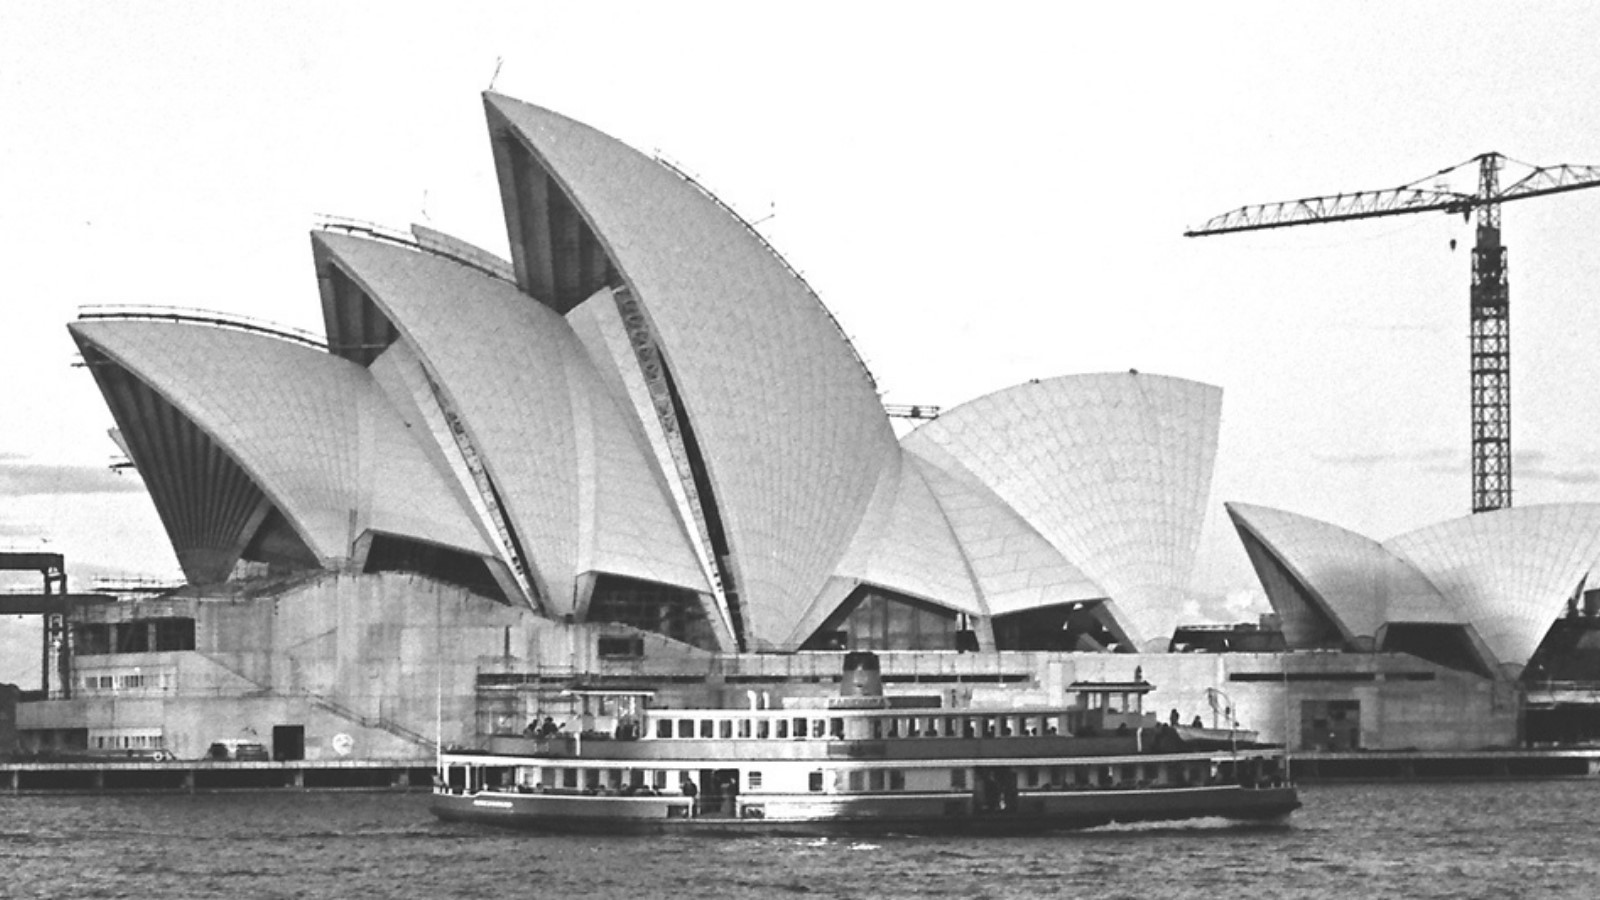 The sails of the Sydney opera house constructed.